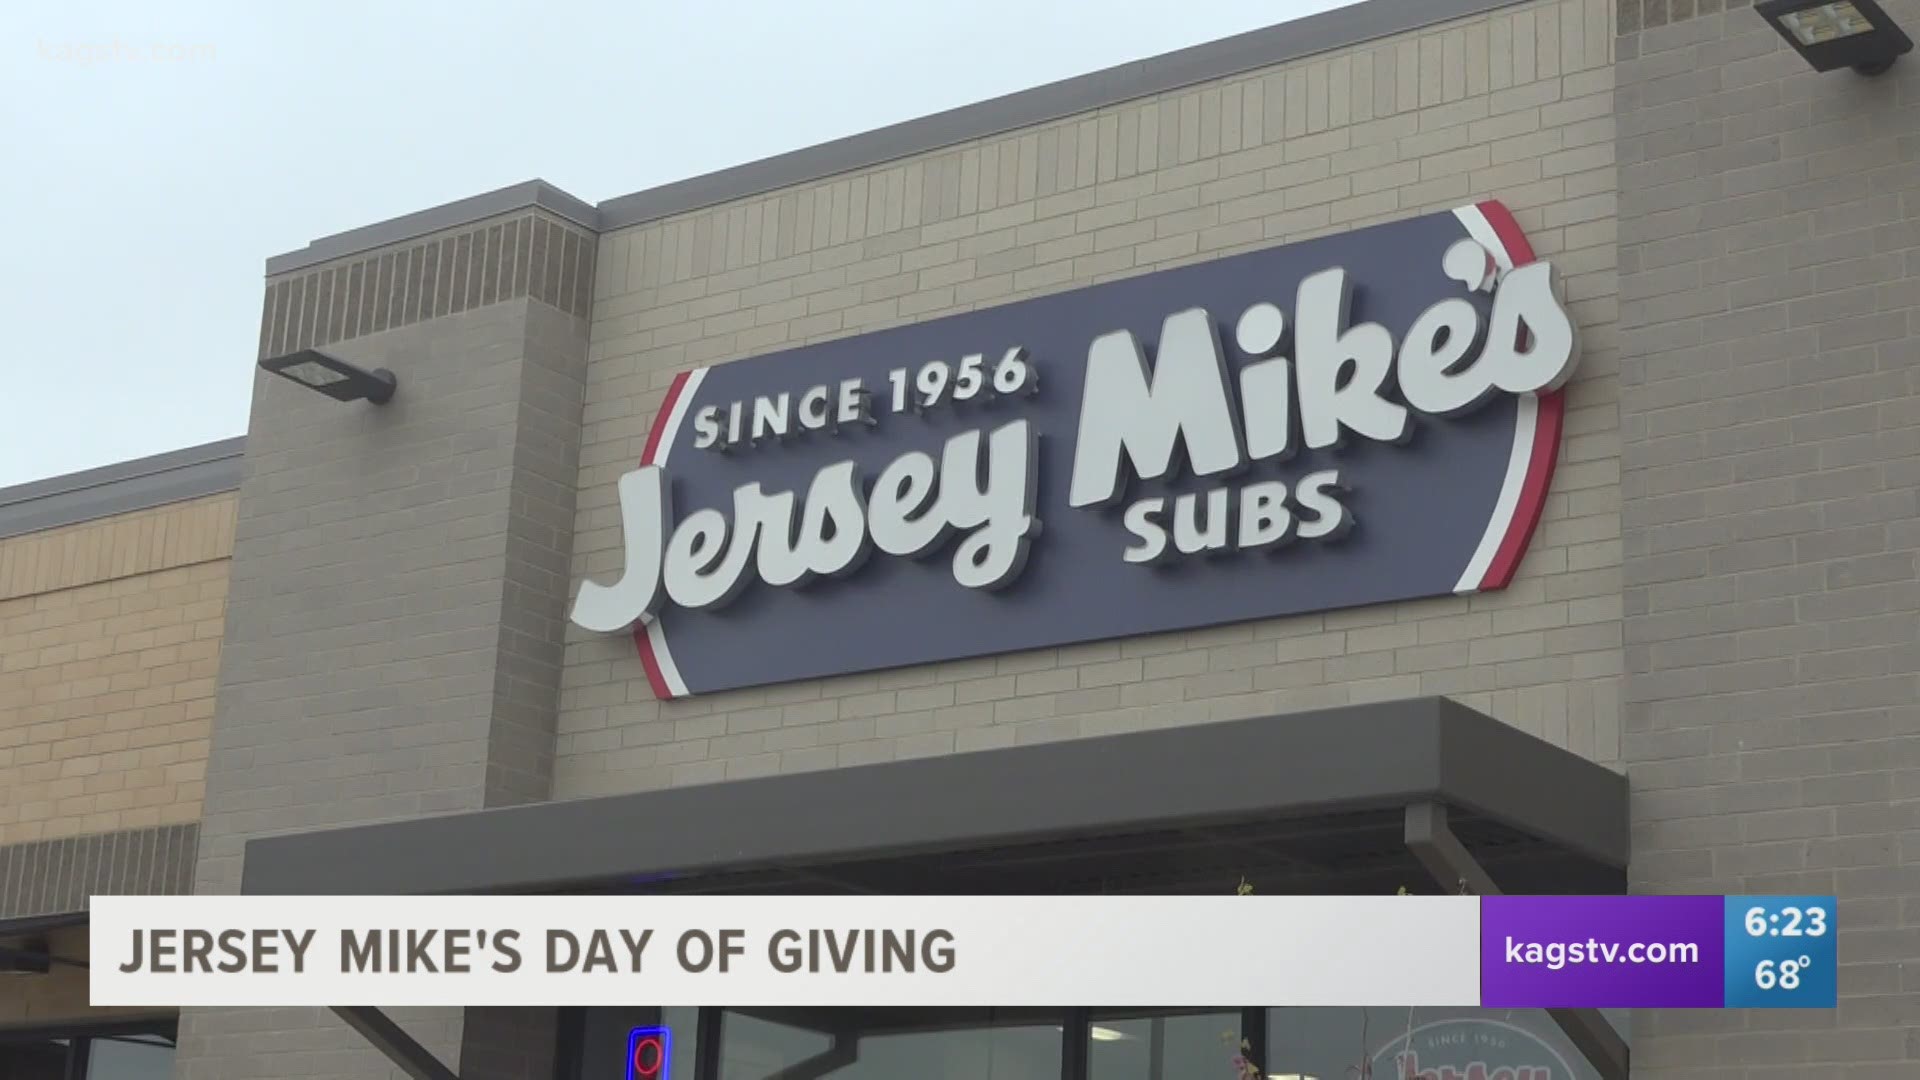 Jersey Mike’s Subs is doing a national day of giving on March 31 where each franchise donates 100% of their sales for that day to a charity.